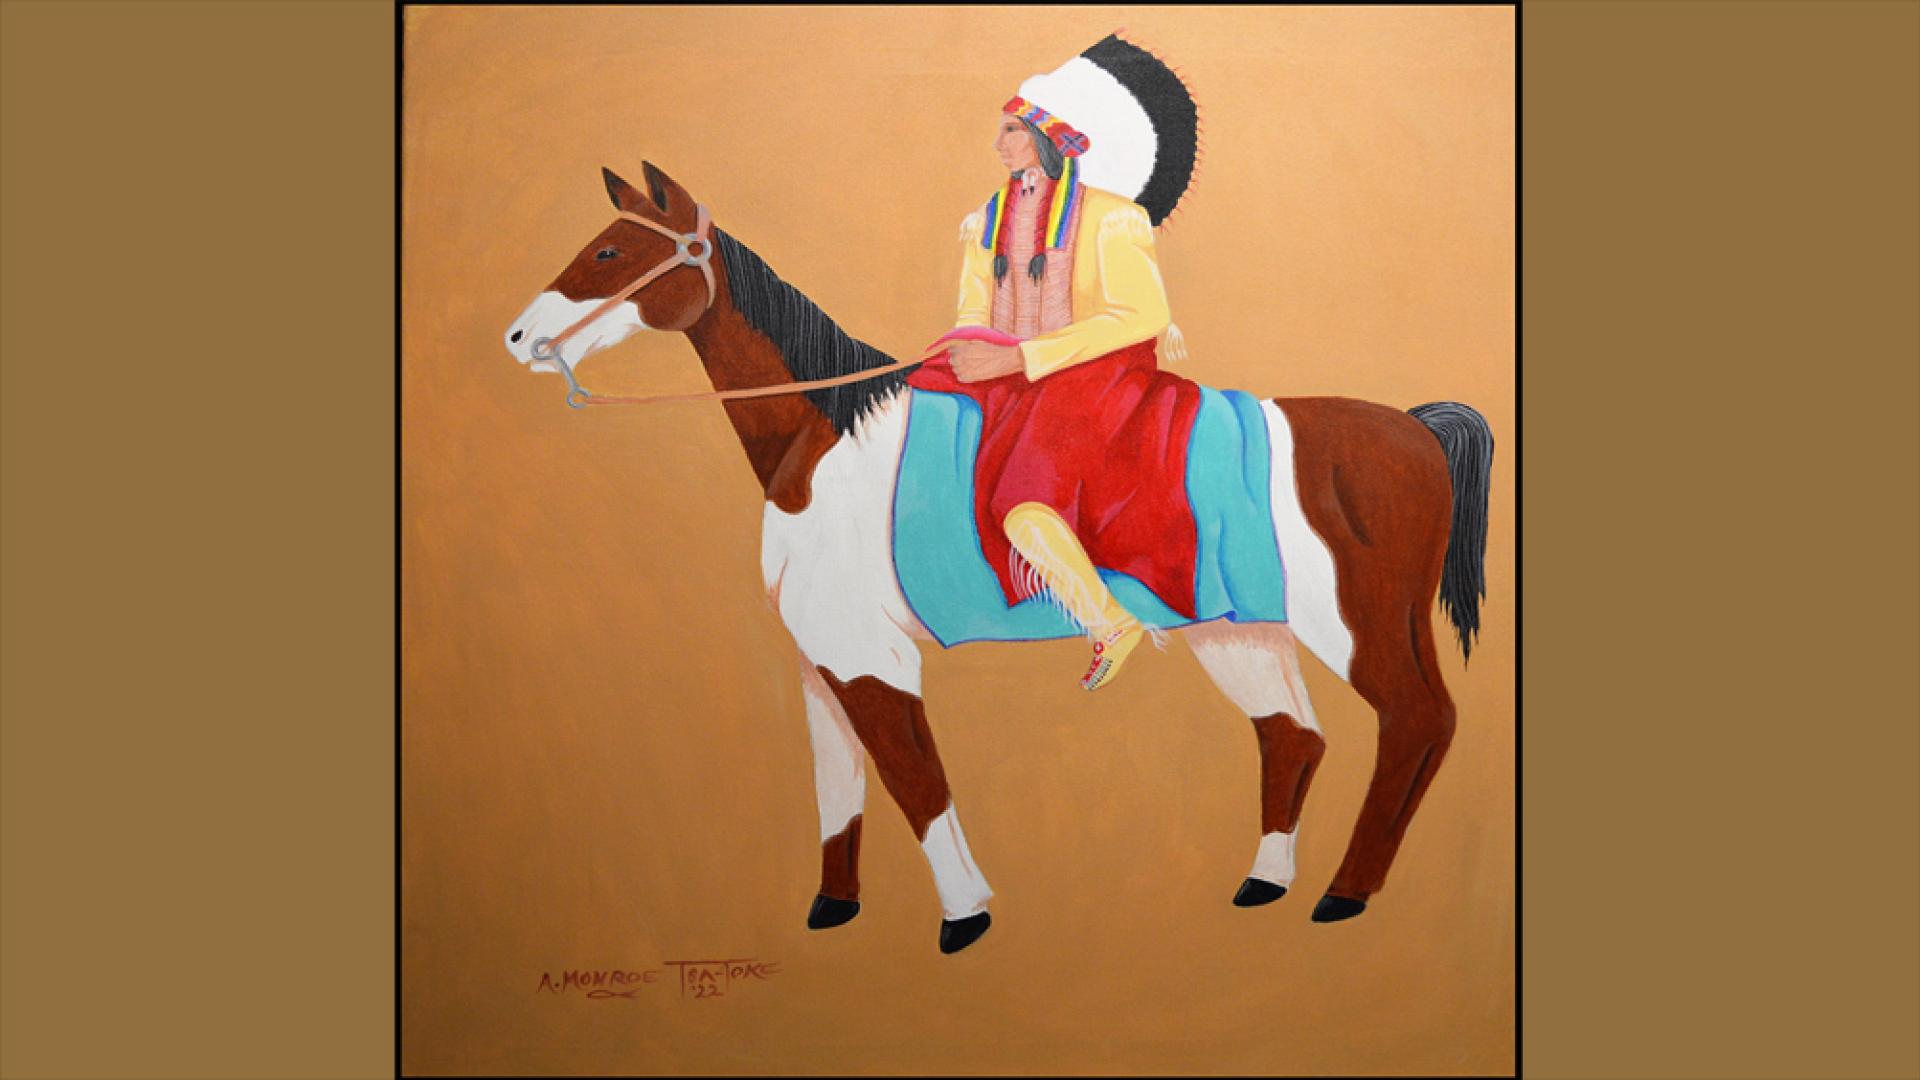 Painting of a man in regalia atop a brown and white horse against a terracotta colored background.